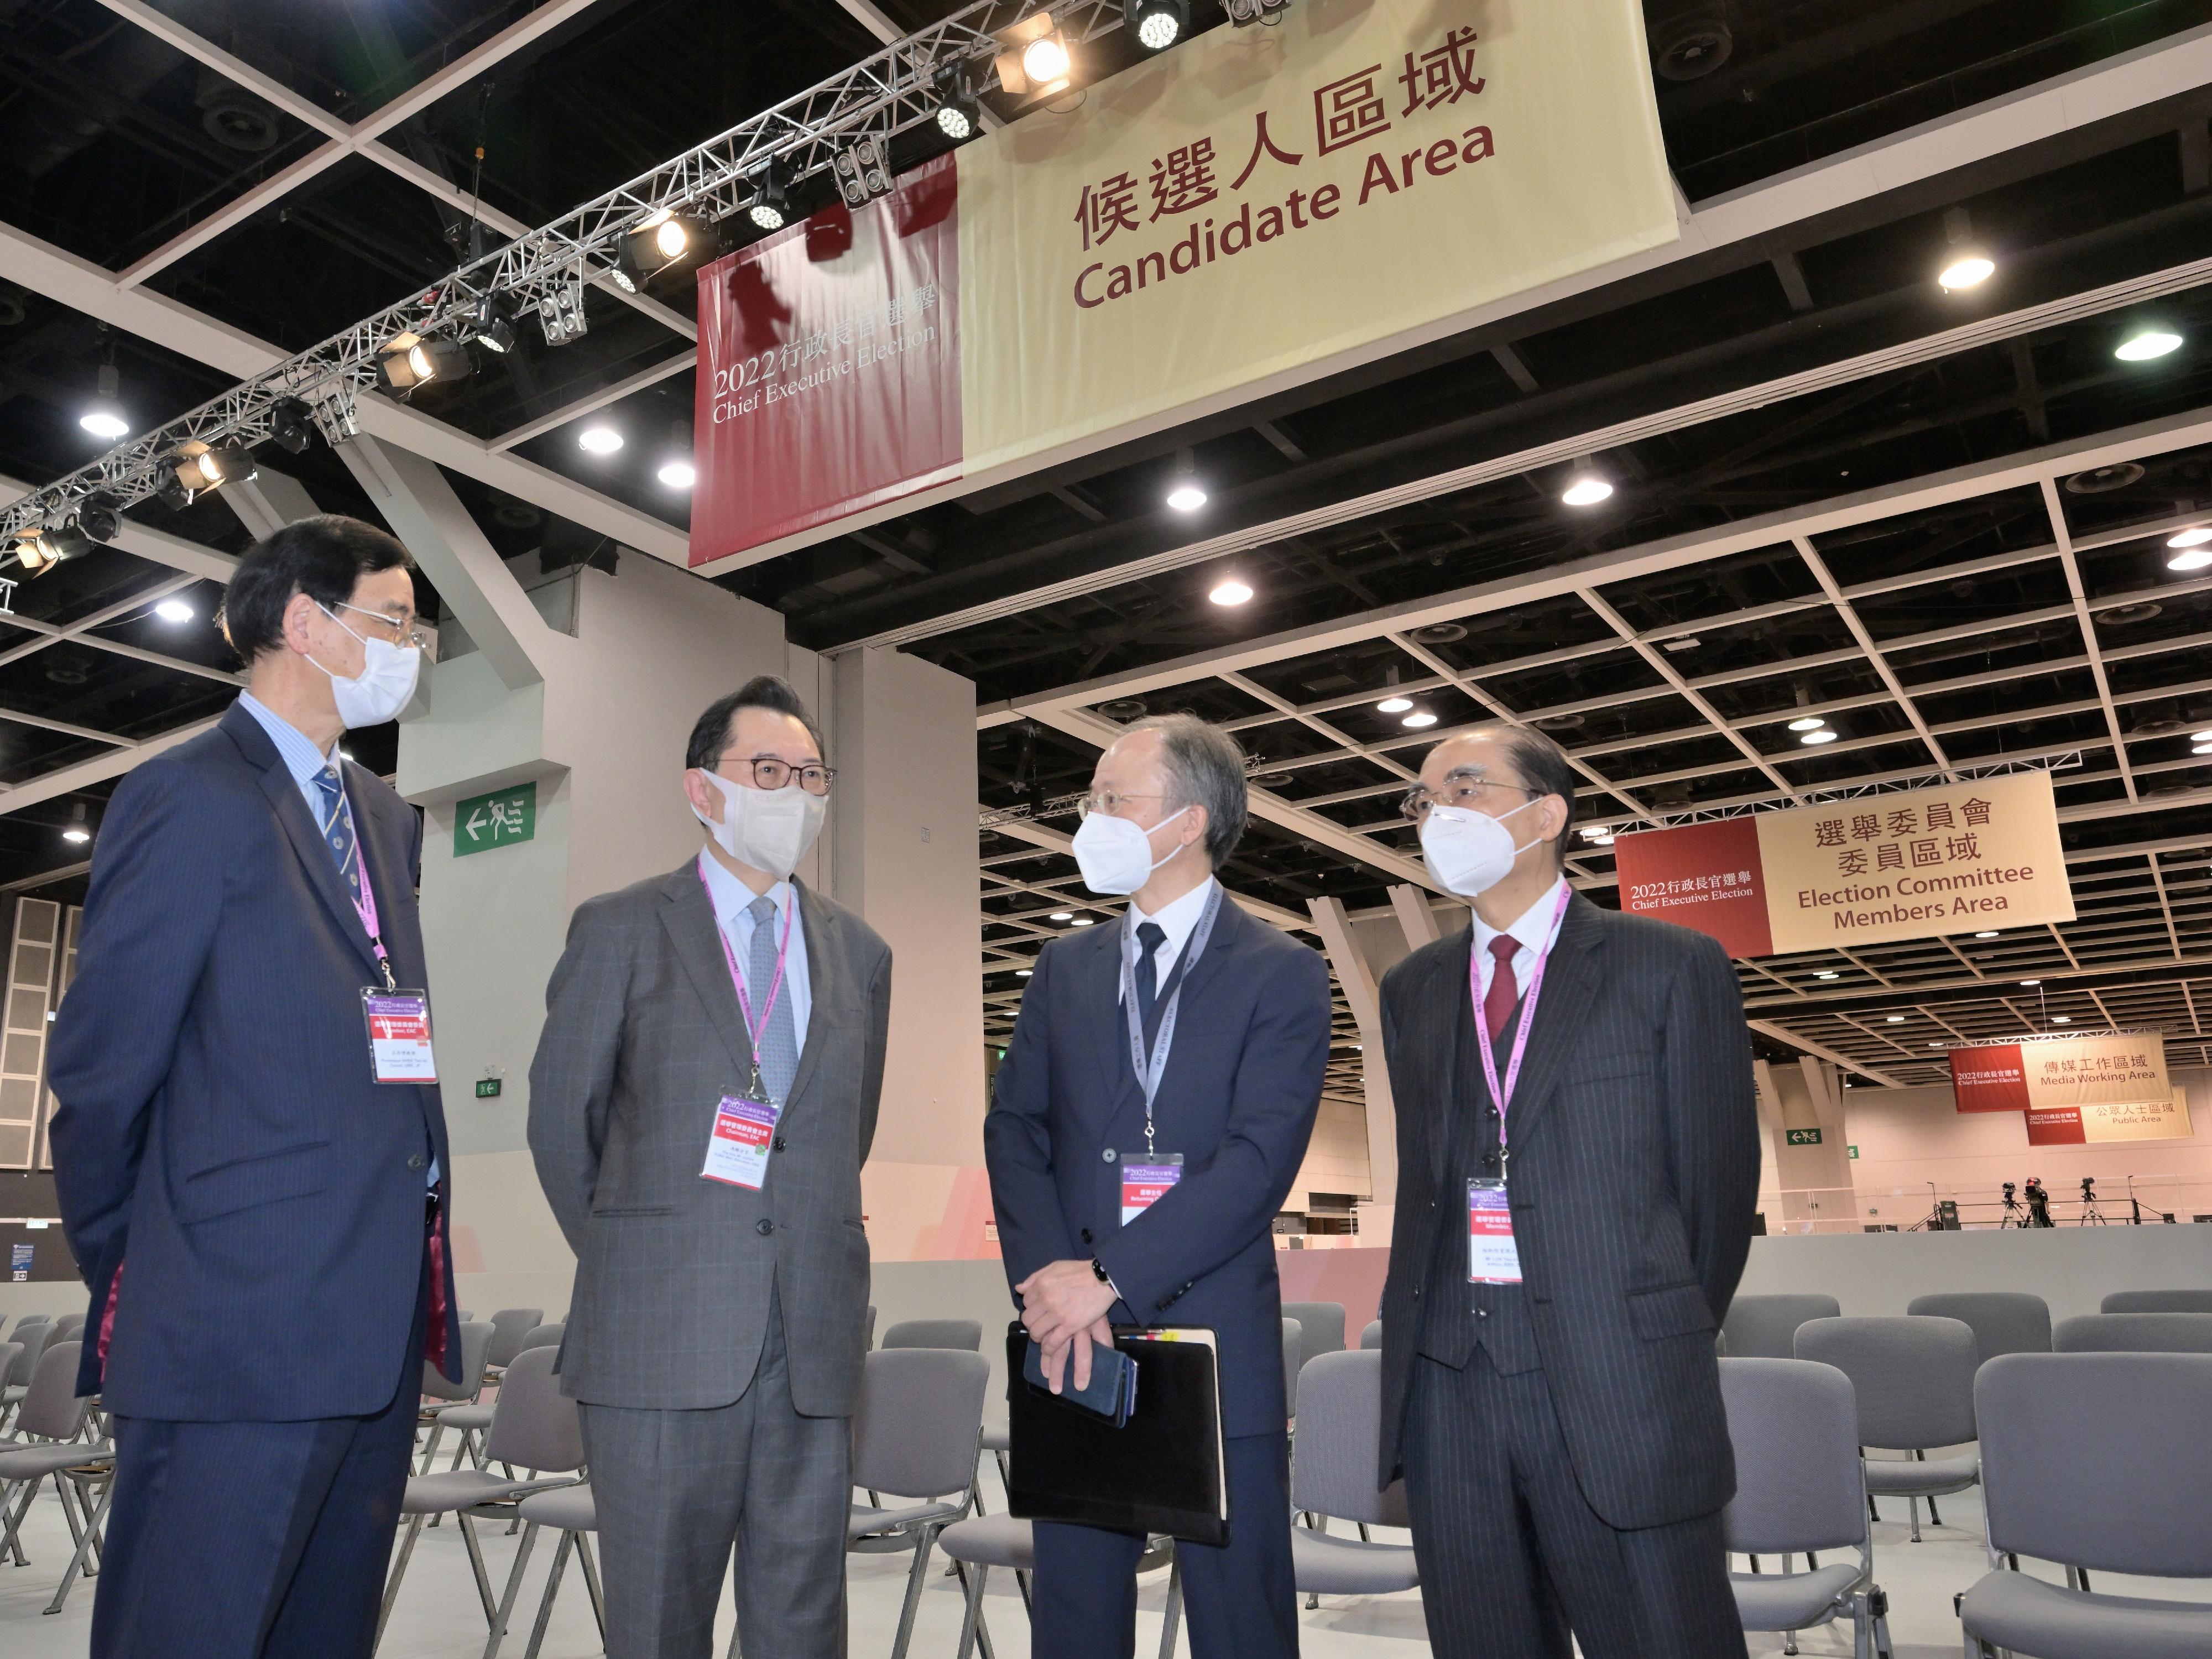 The Chairman of the Electoral Affairs Commission (EAC), Mr Justice Barnabas Fung Wah (second left), EAC members Mr Arthur Luk, SC (first right), and Professor Daniel Shek (first left), and the Returning Officer, Mr Justice Keith Yeung Kar-hung (second right), visit the central counting station cum media centre of the 2022 Chief Executive Election at the Hong Kong Convention and Exhibition Centre in Wan Chai today (May 7).